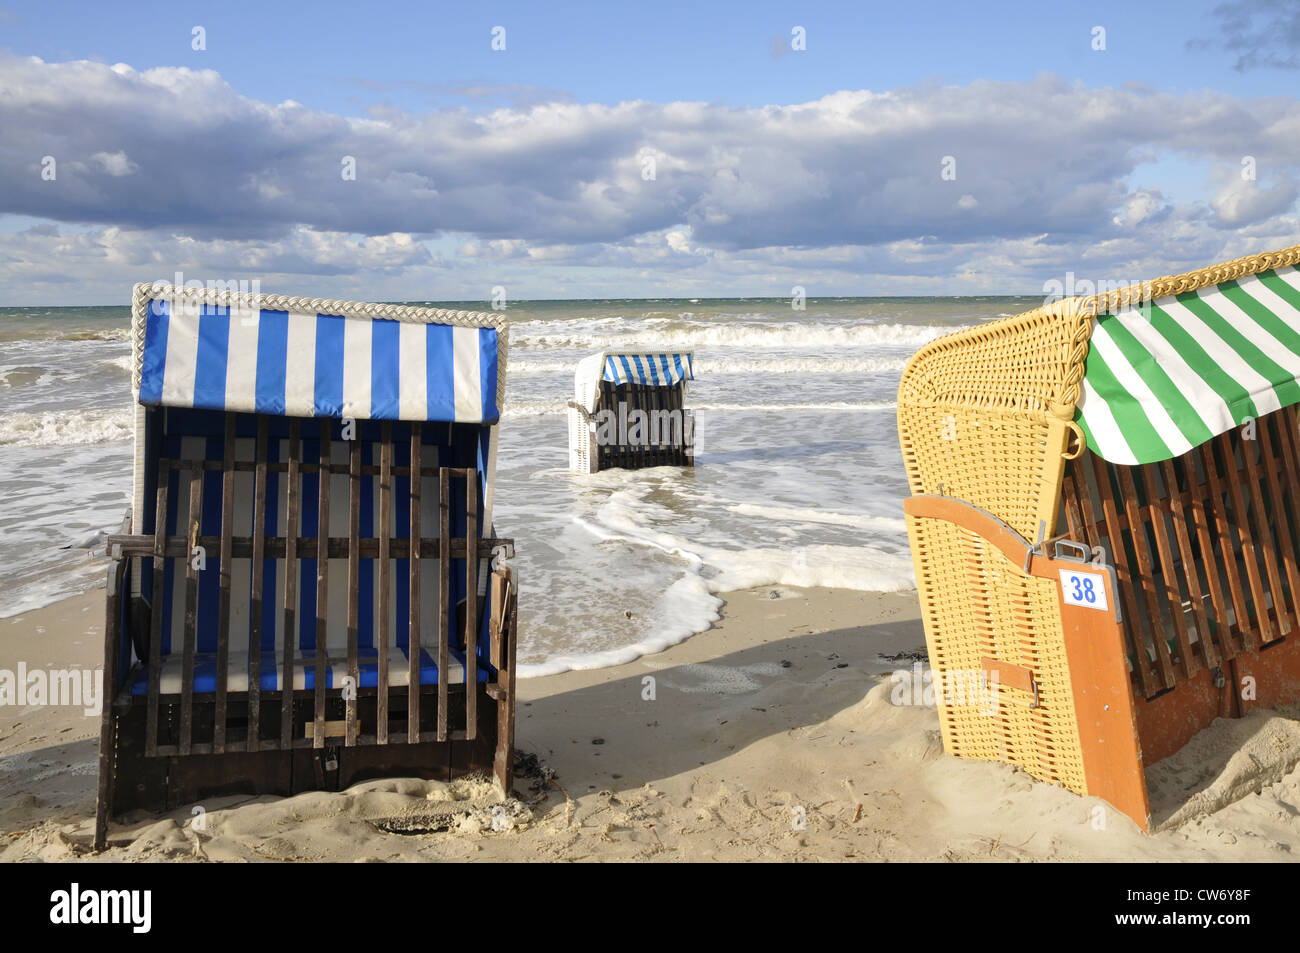 beach chairs at the sand beach, some standing in the surf, Germany, Mecklenburg Vorpommern, Ostsee Stock Photo